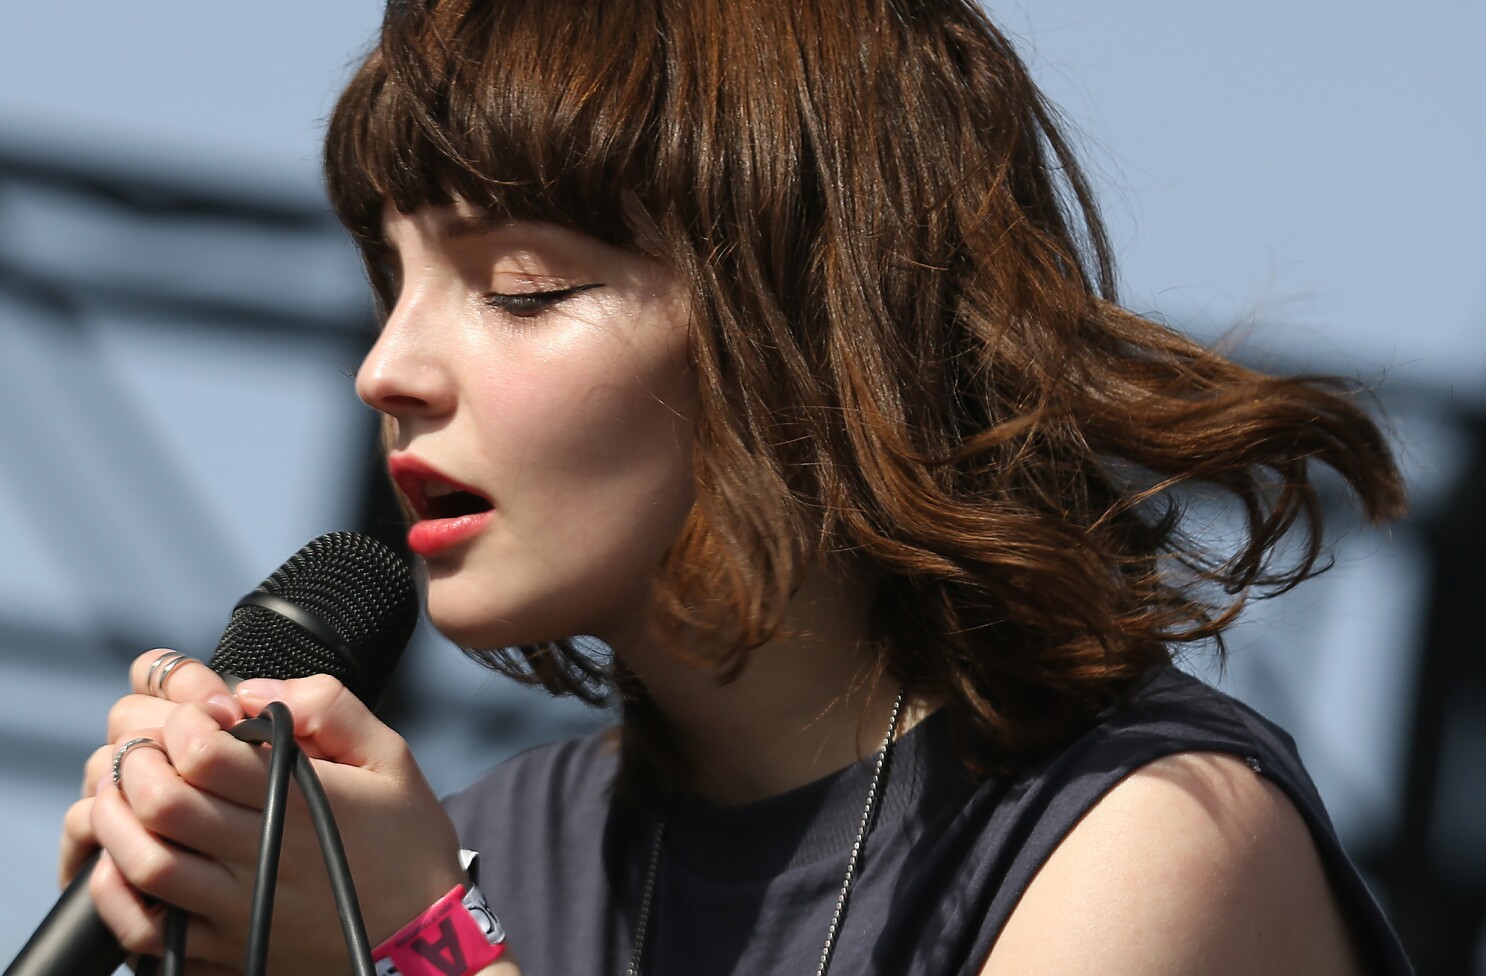 Who Is Lauren Mayberry's Boyfriend? All You Need To Know!